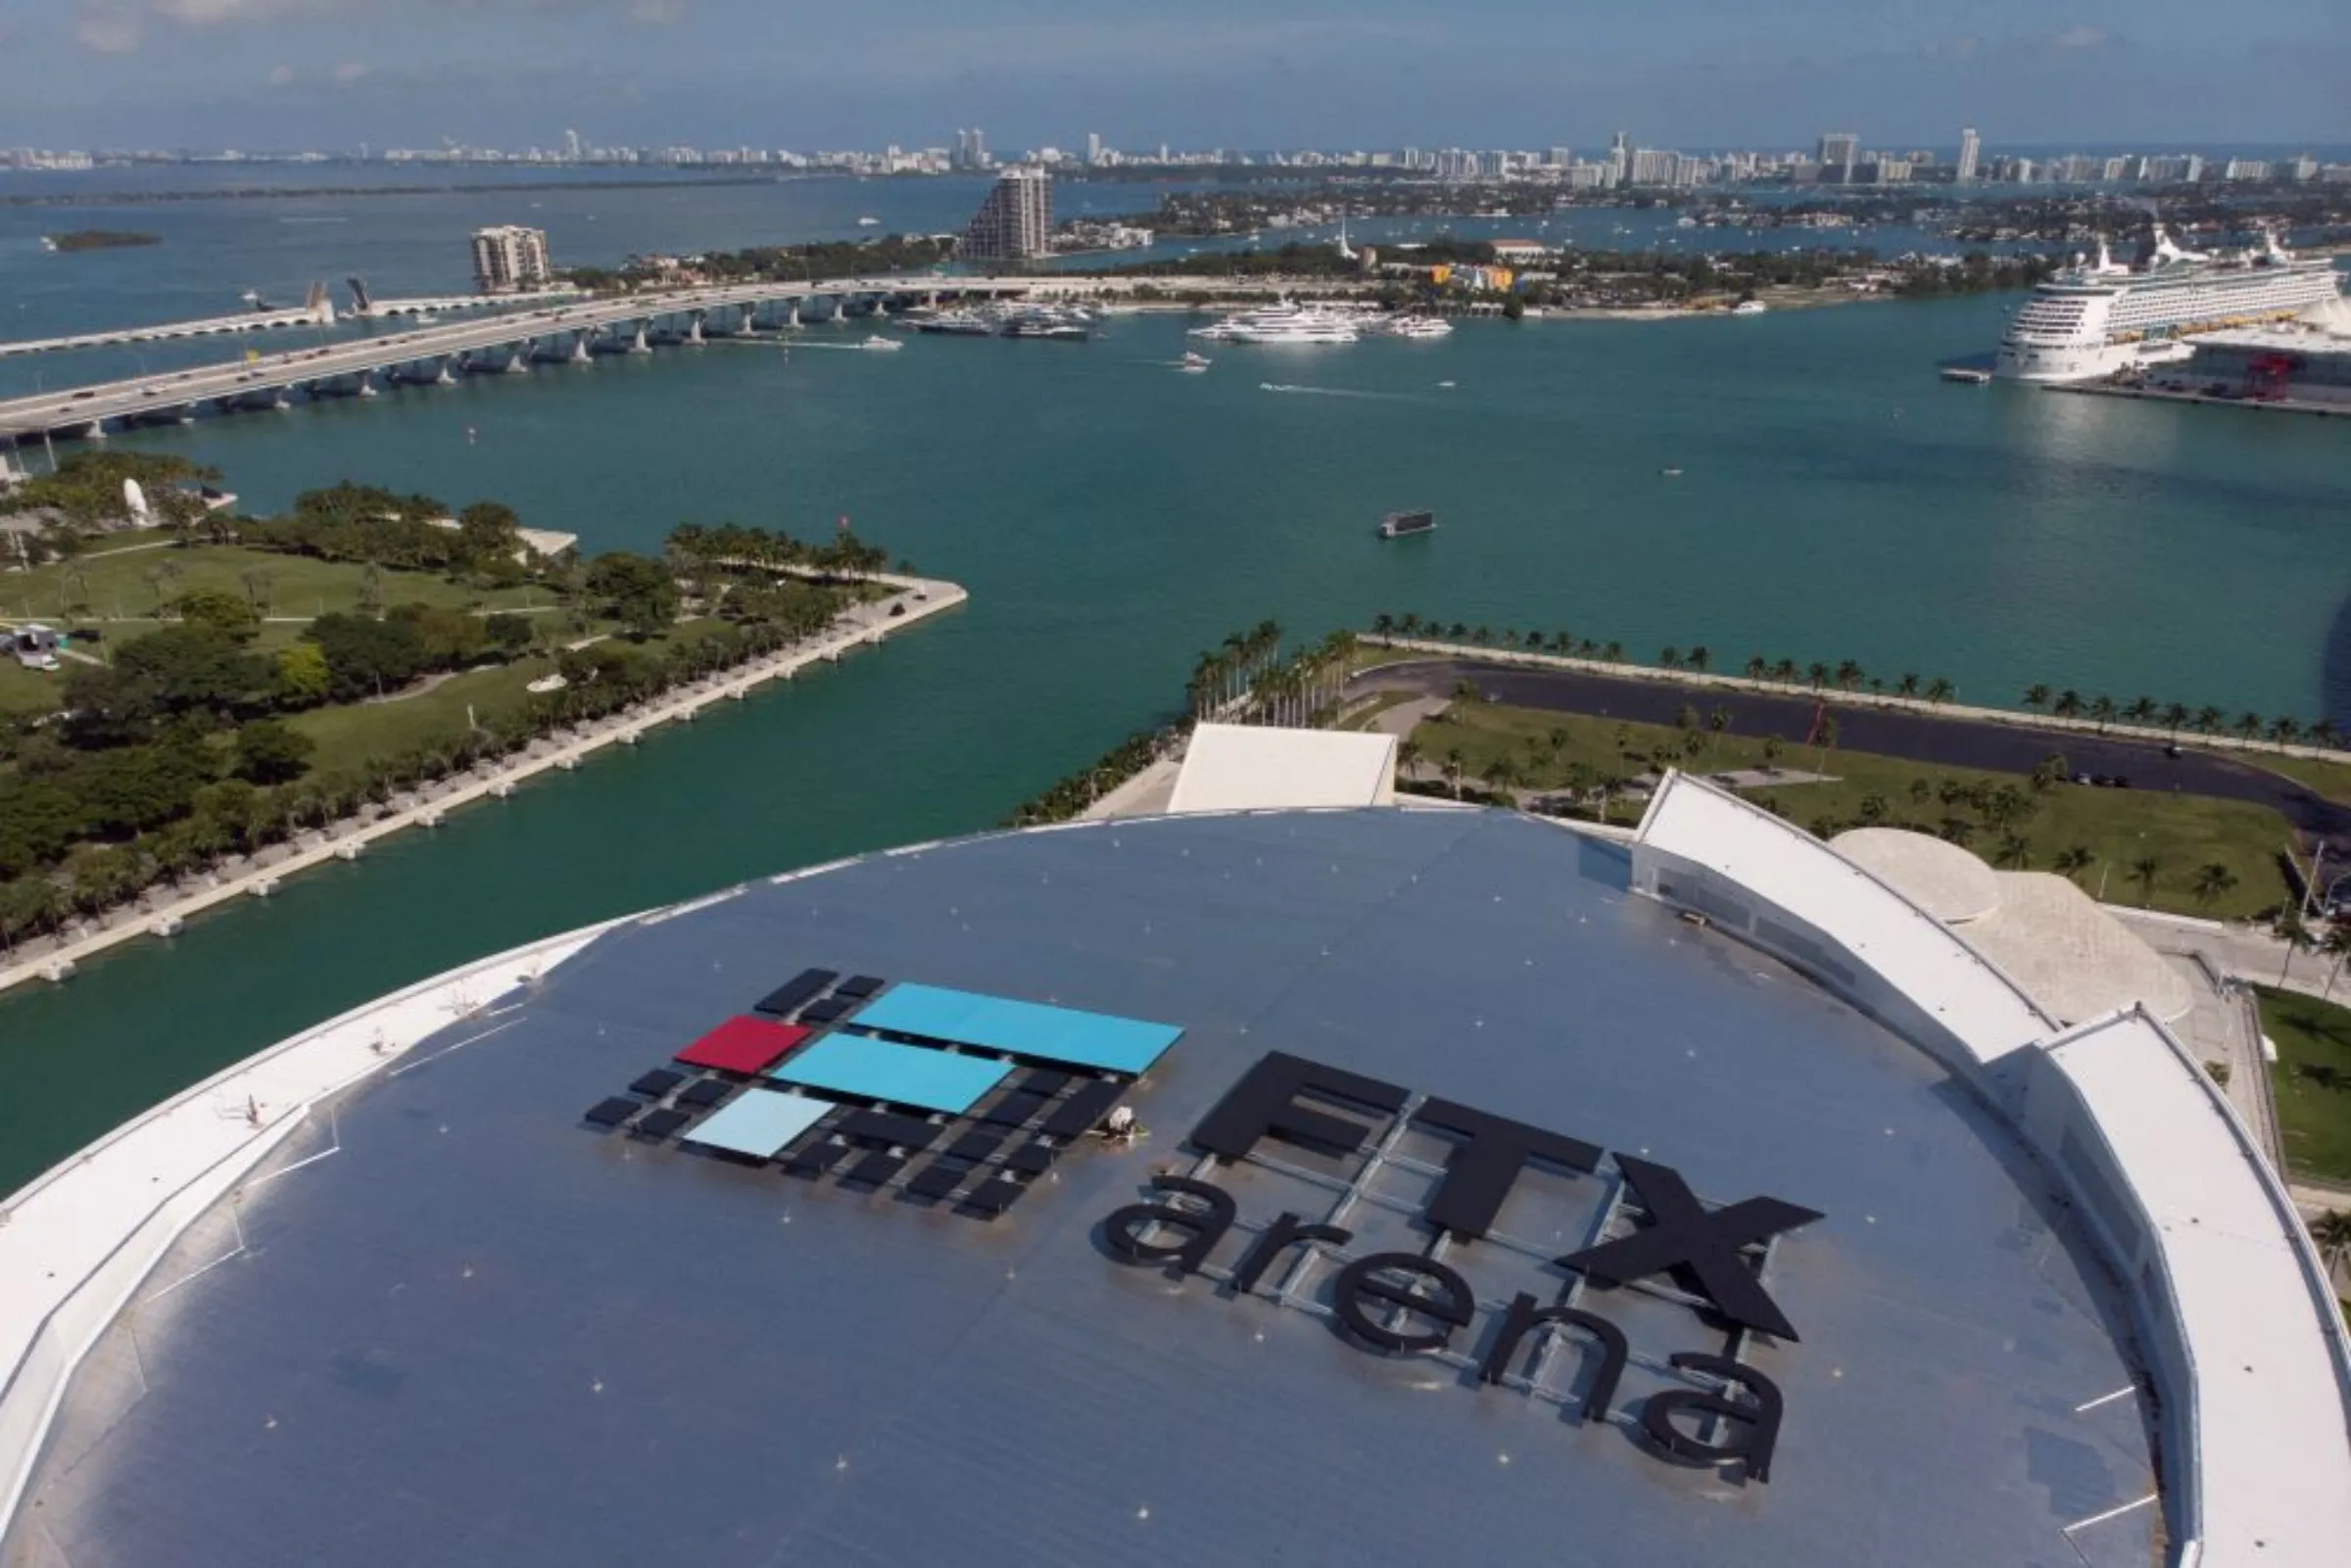 The logo of FTX is seen in the rooftop of the FTX Arena in Miami, Florida, U.S., November 12, 2022